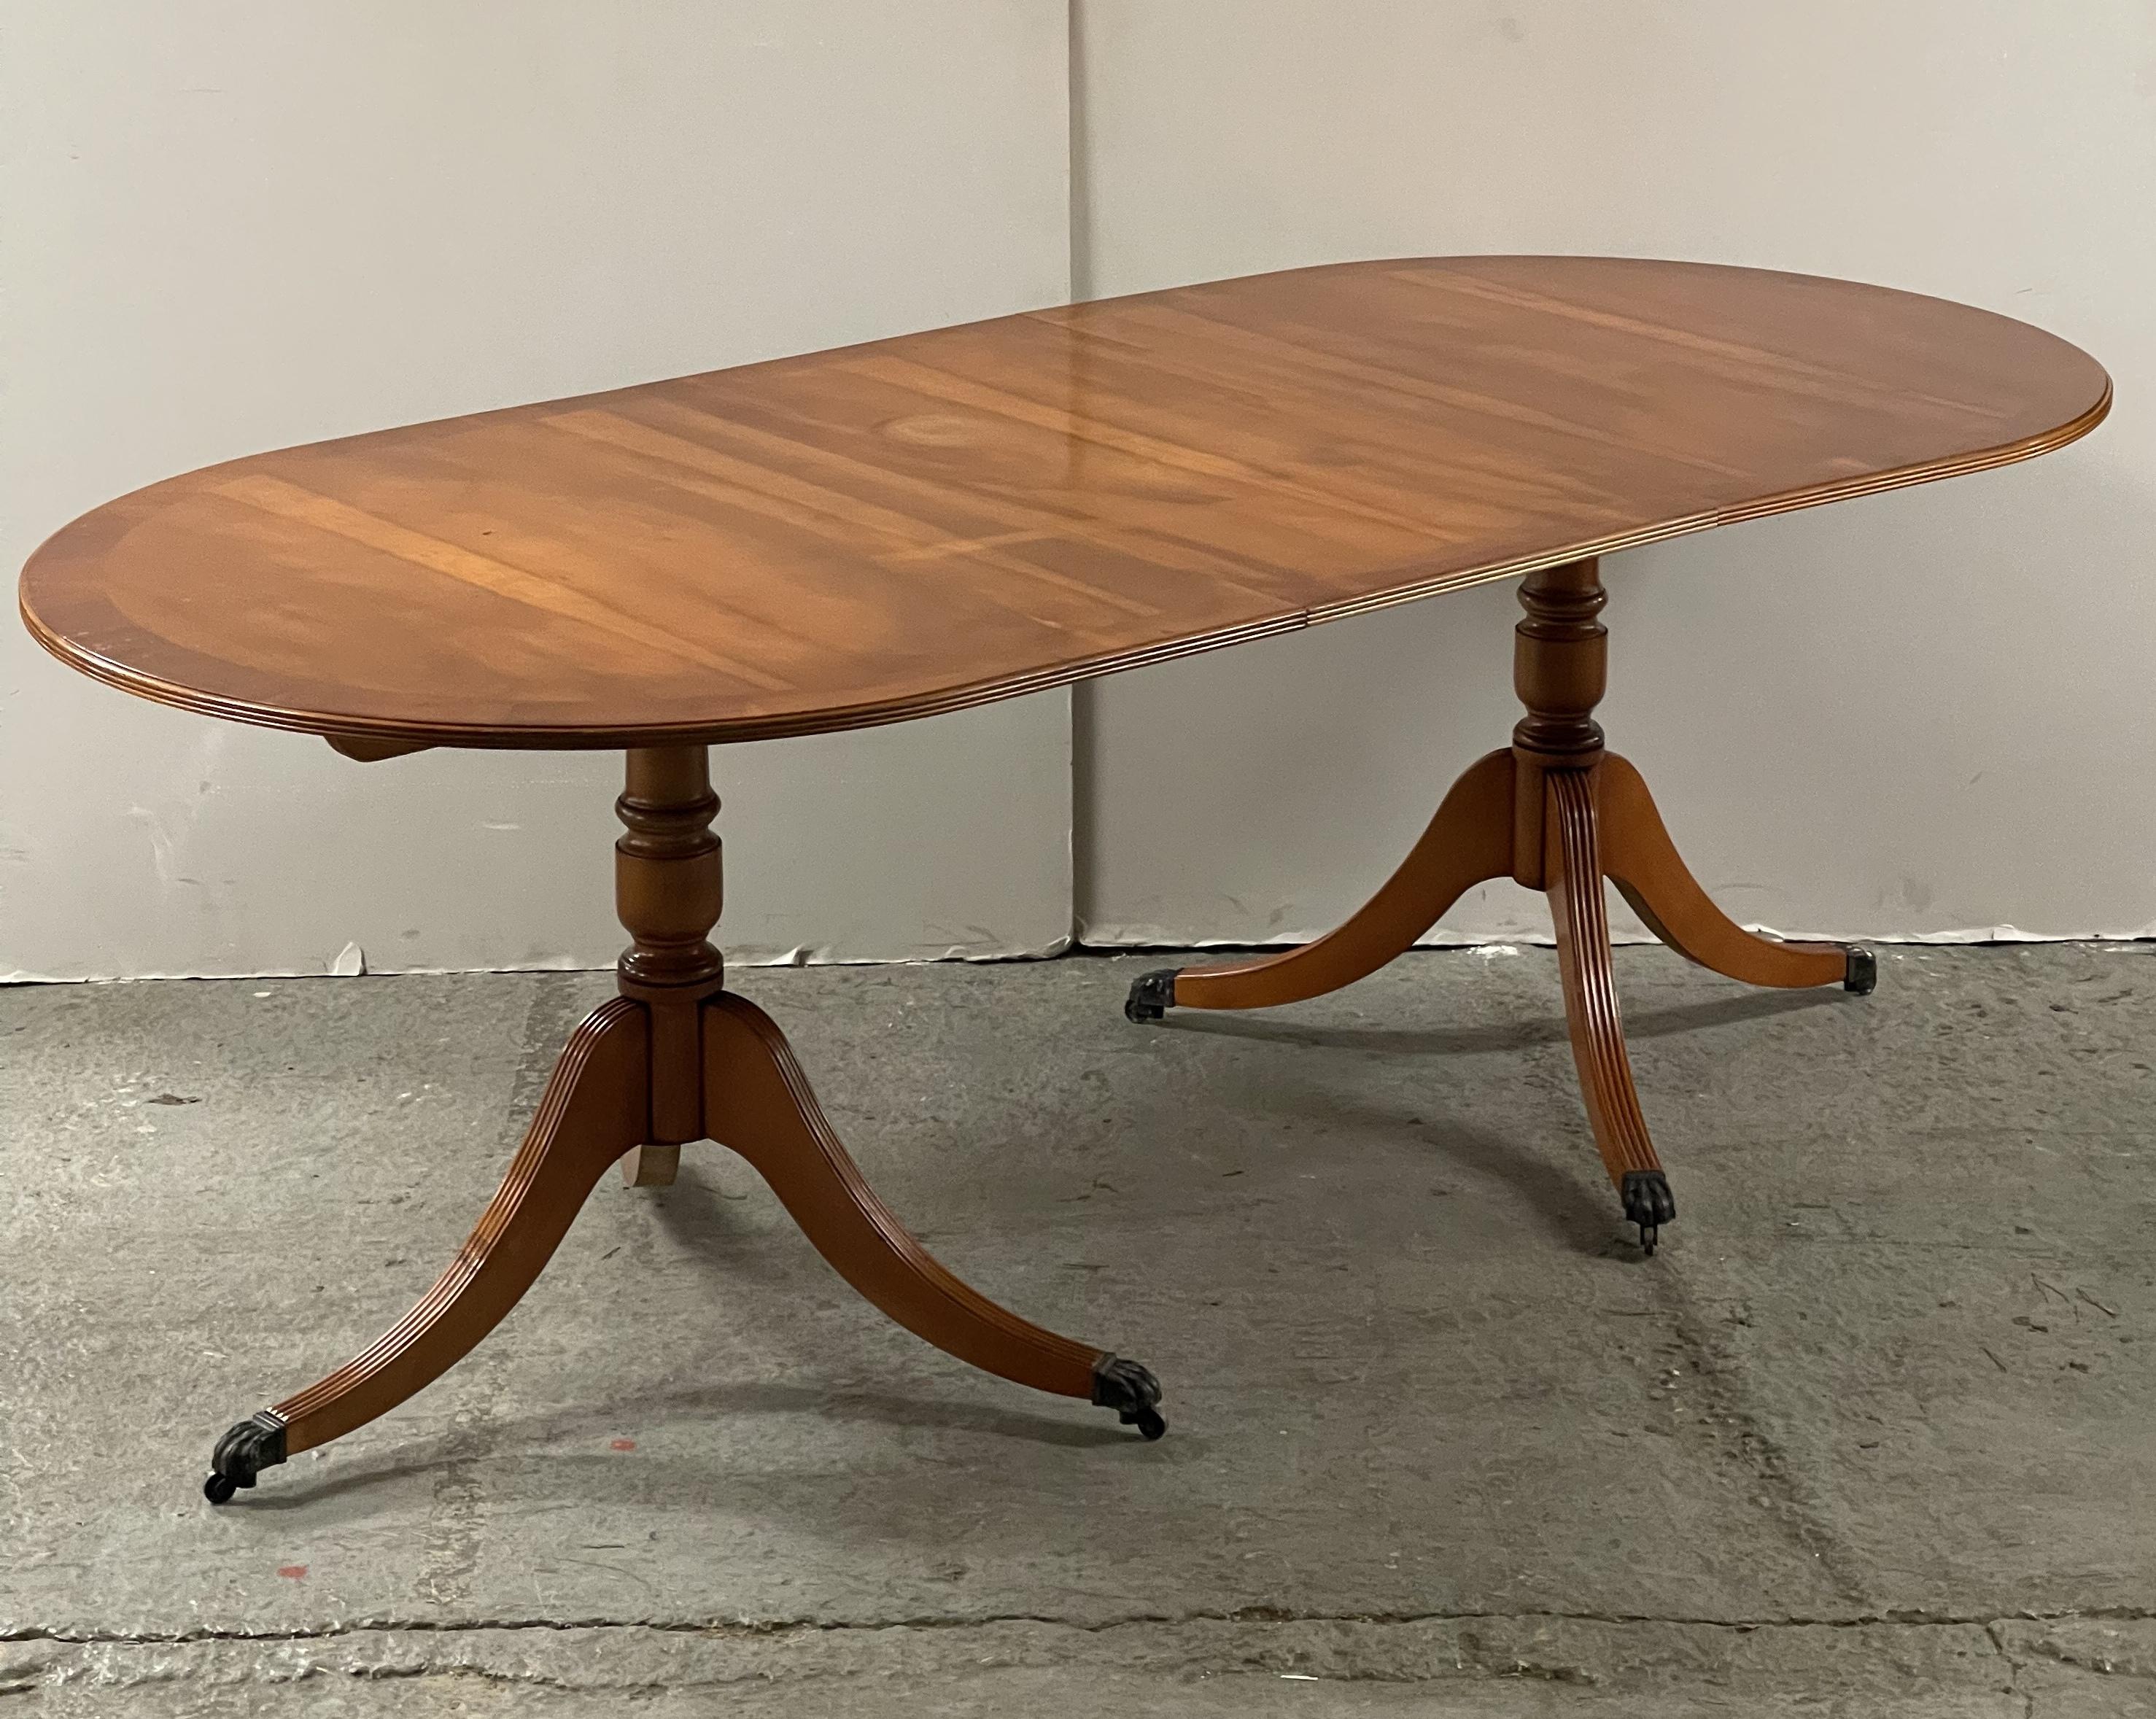 Vintage Yew Wood Twin Pedestal Extending Dining Table Seats 6-8 People For Sale 8